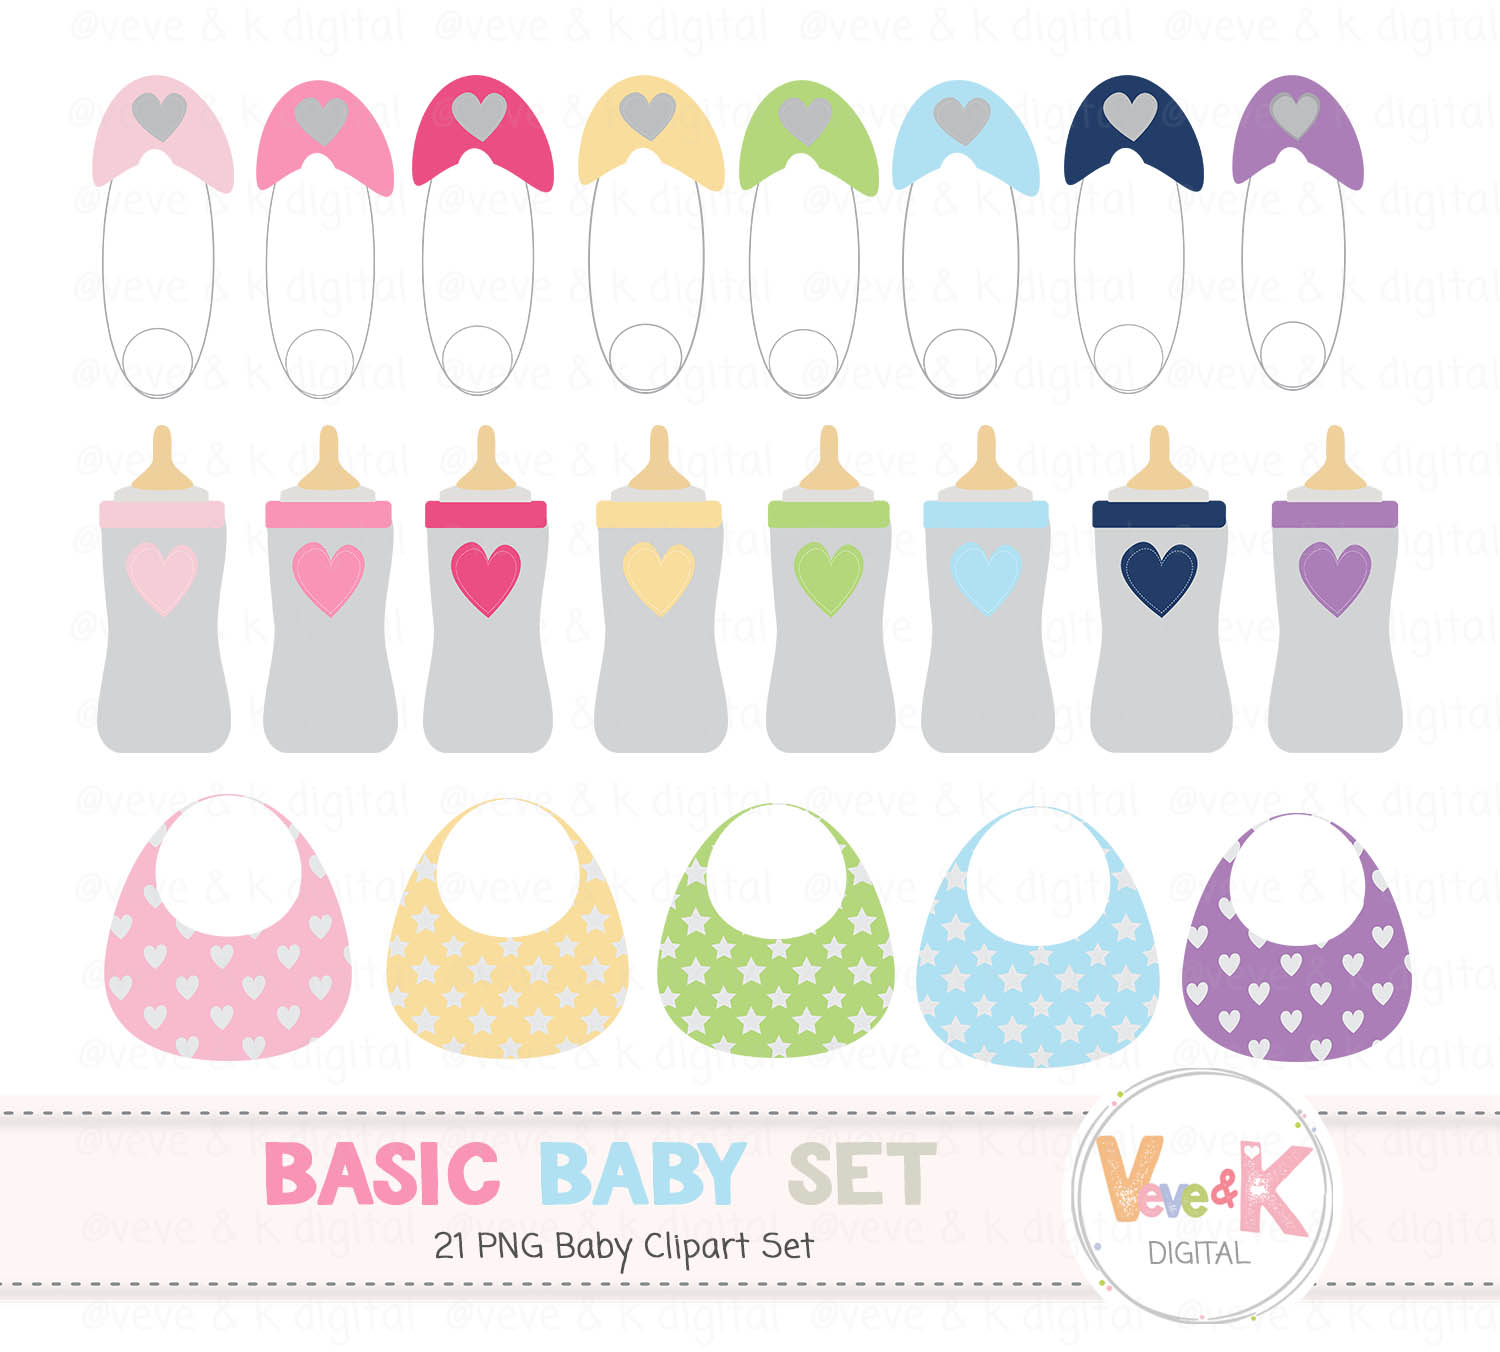 Clip art diy its. Baby clipart baby shower